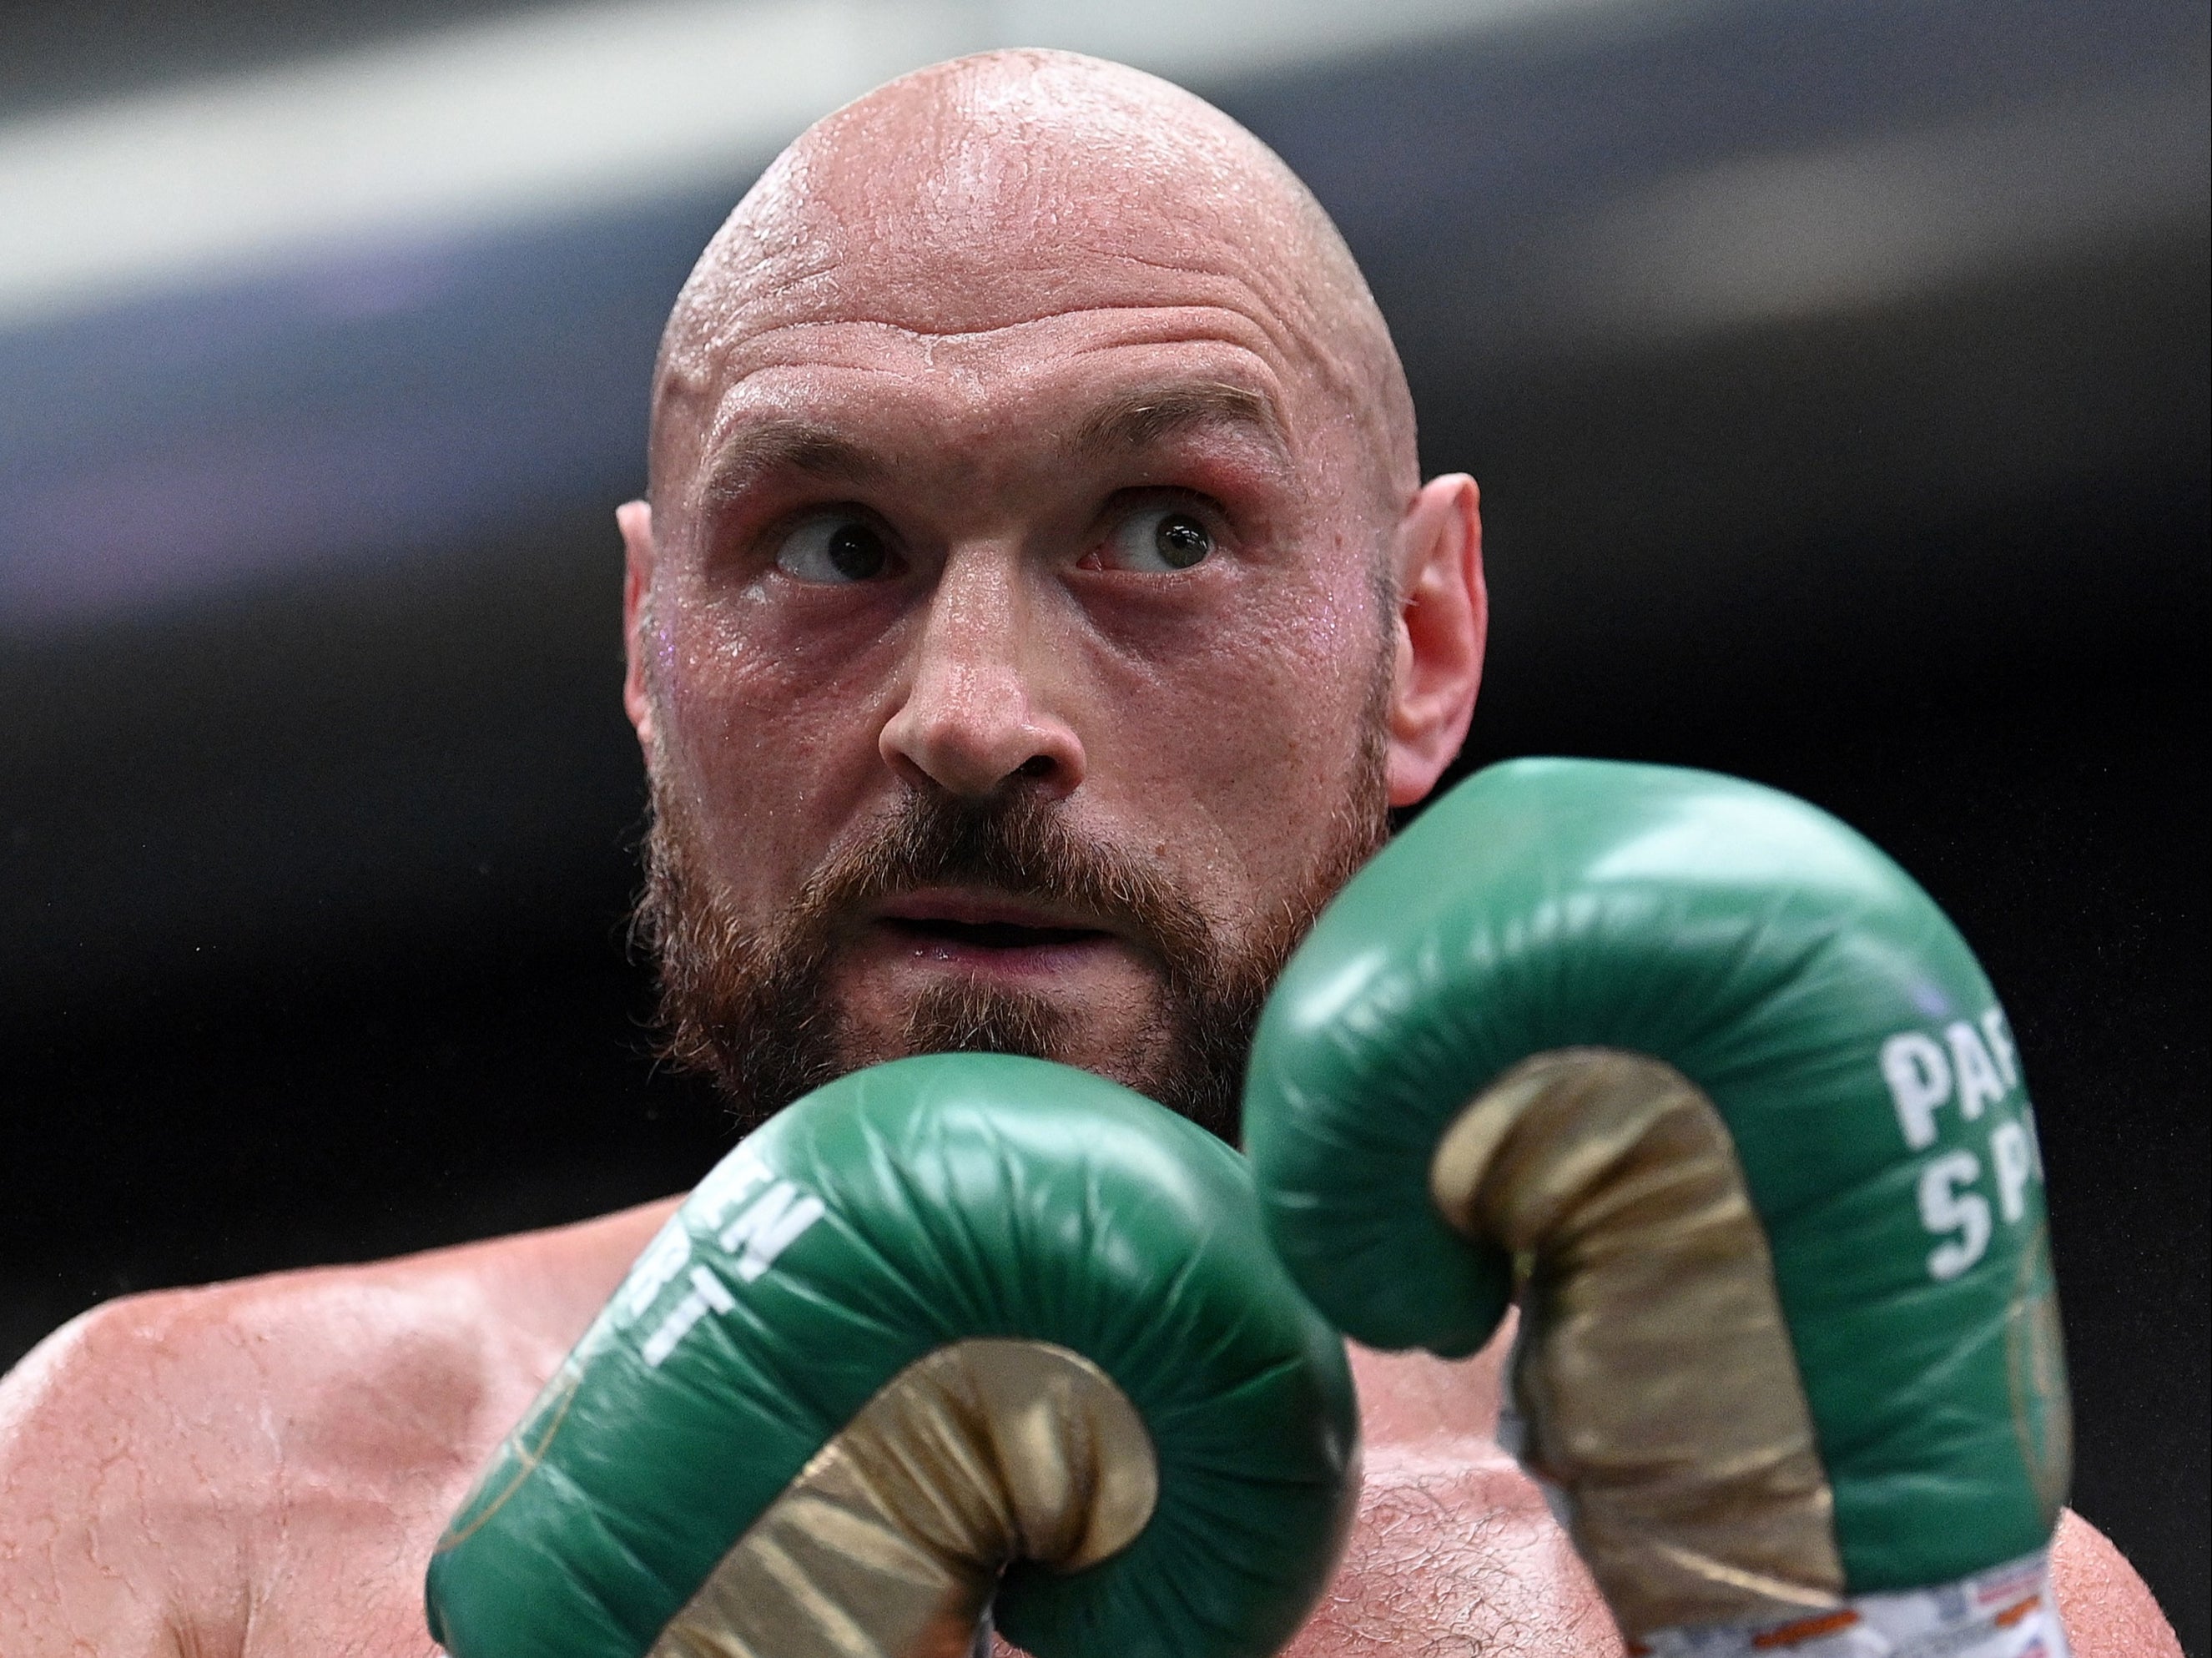 Tyson Fury at an open workout on Tuesday, ahead of his fight with Dillian Whyte